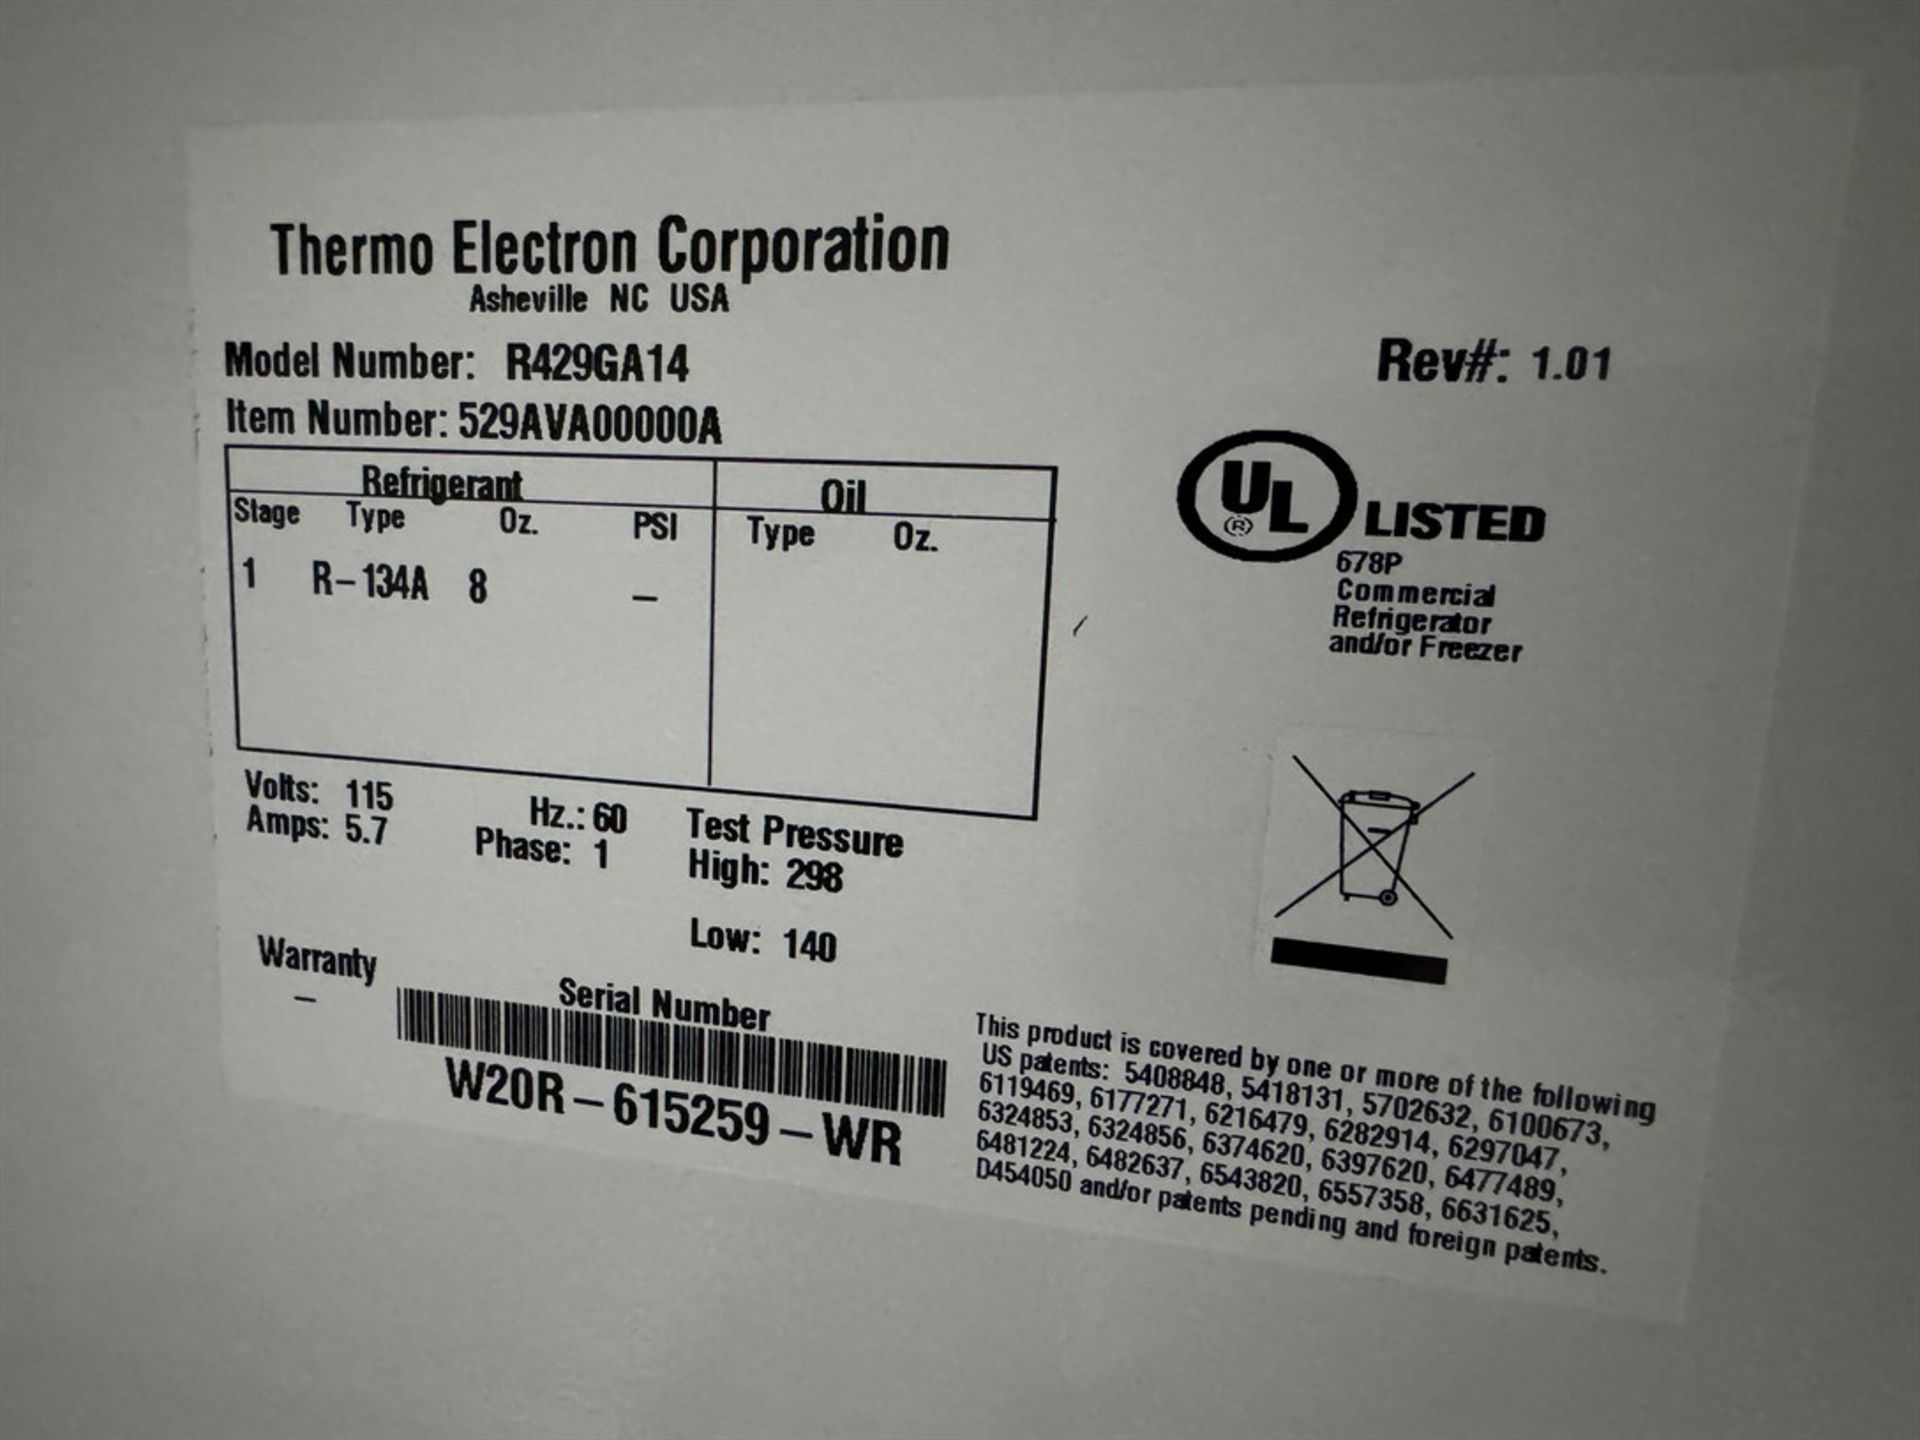 THERMO ELECTRON R429GA14 General Purpose Refrigerator, s/n W20R-615259-WR - Image 3 of 4